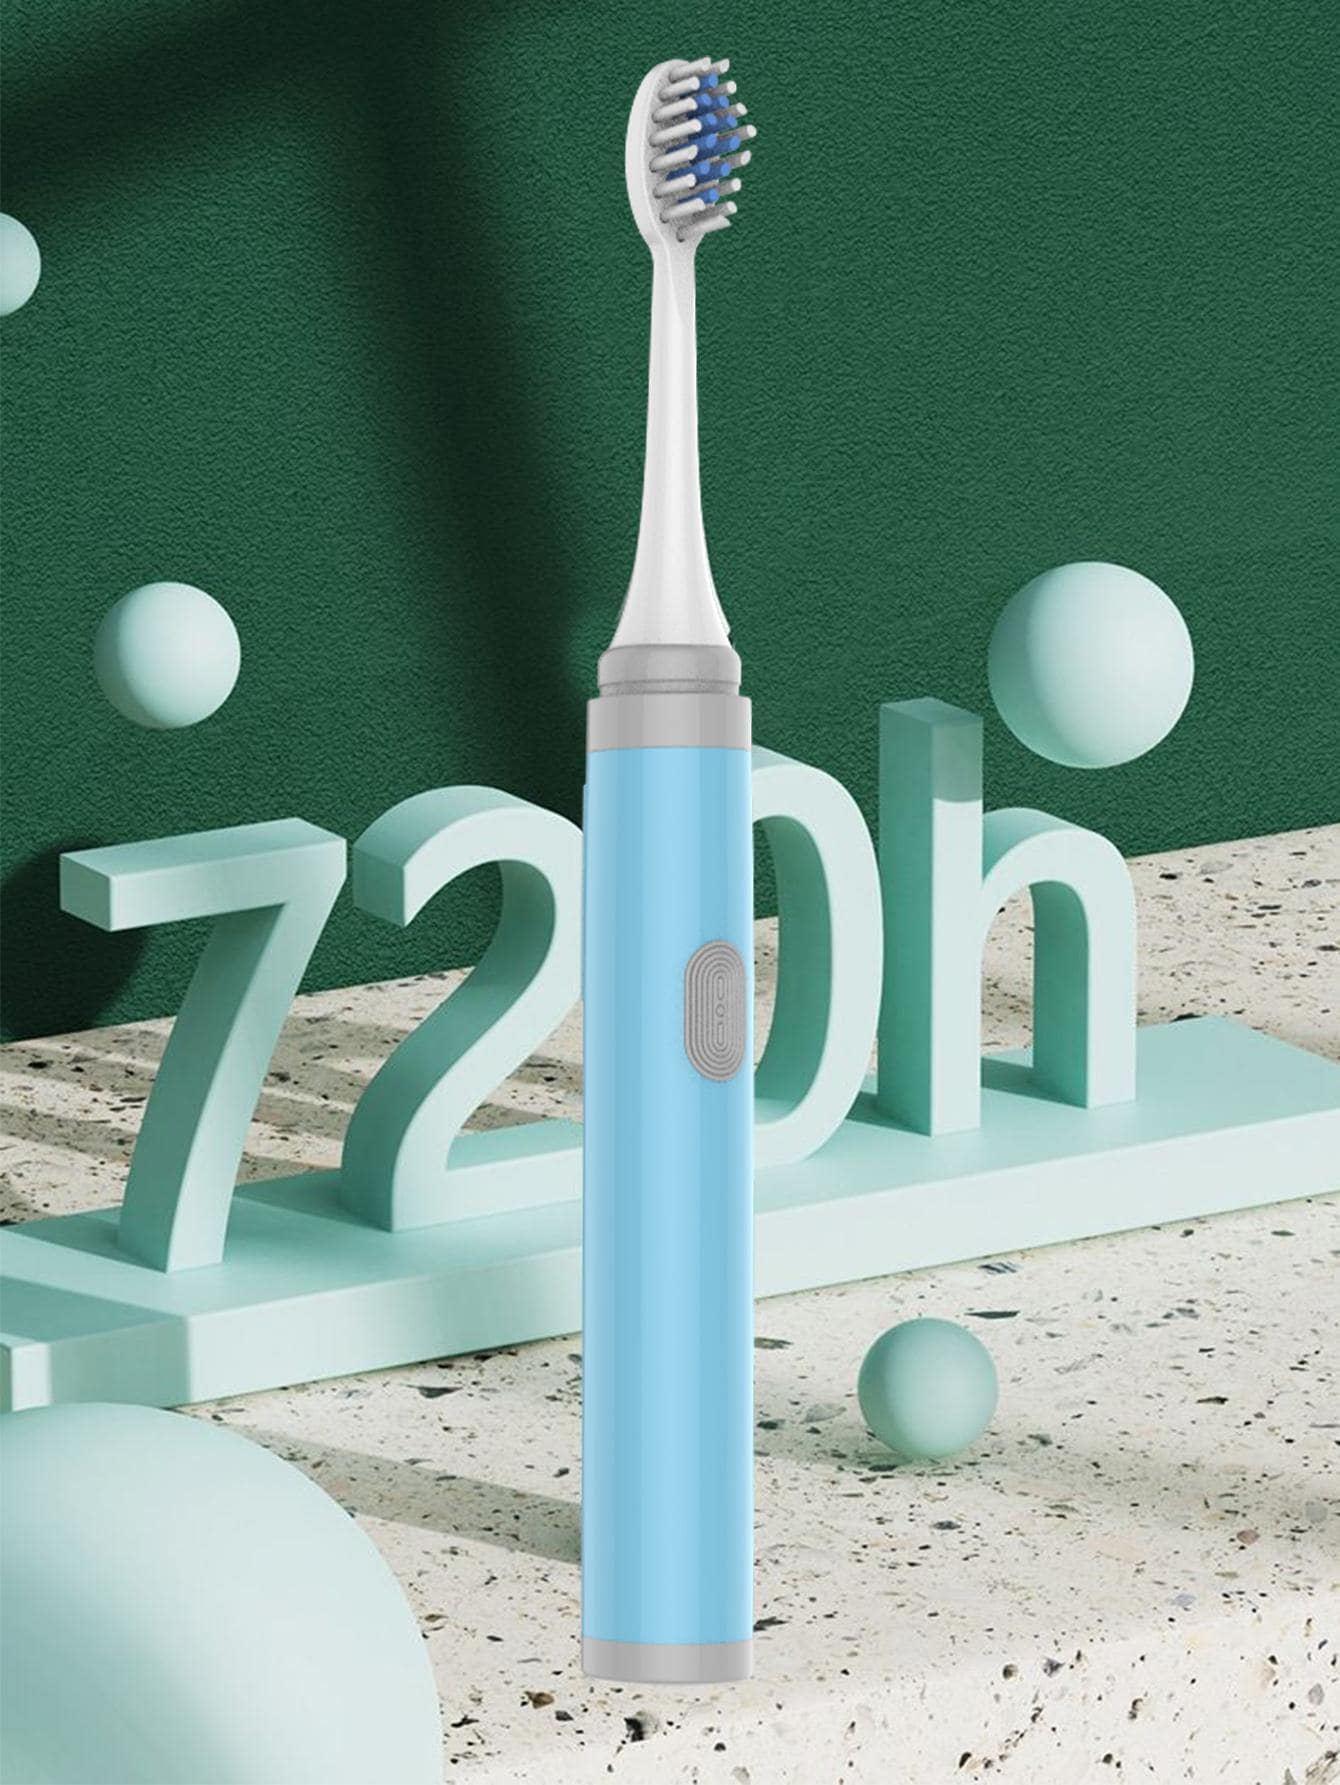 1pc PP Electric Toothbrush & 8pcs Replacement Toothbrush Head, Modern Two Tone Waterproof Portable Electric Toothbrush For Home